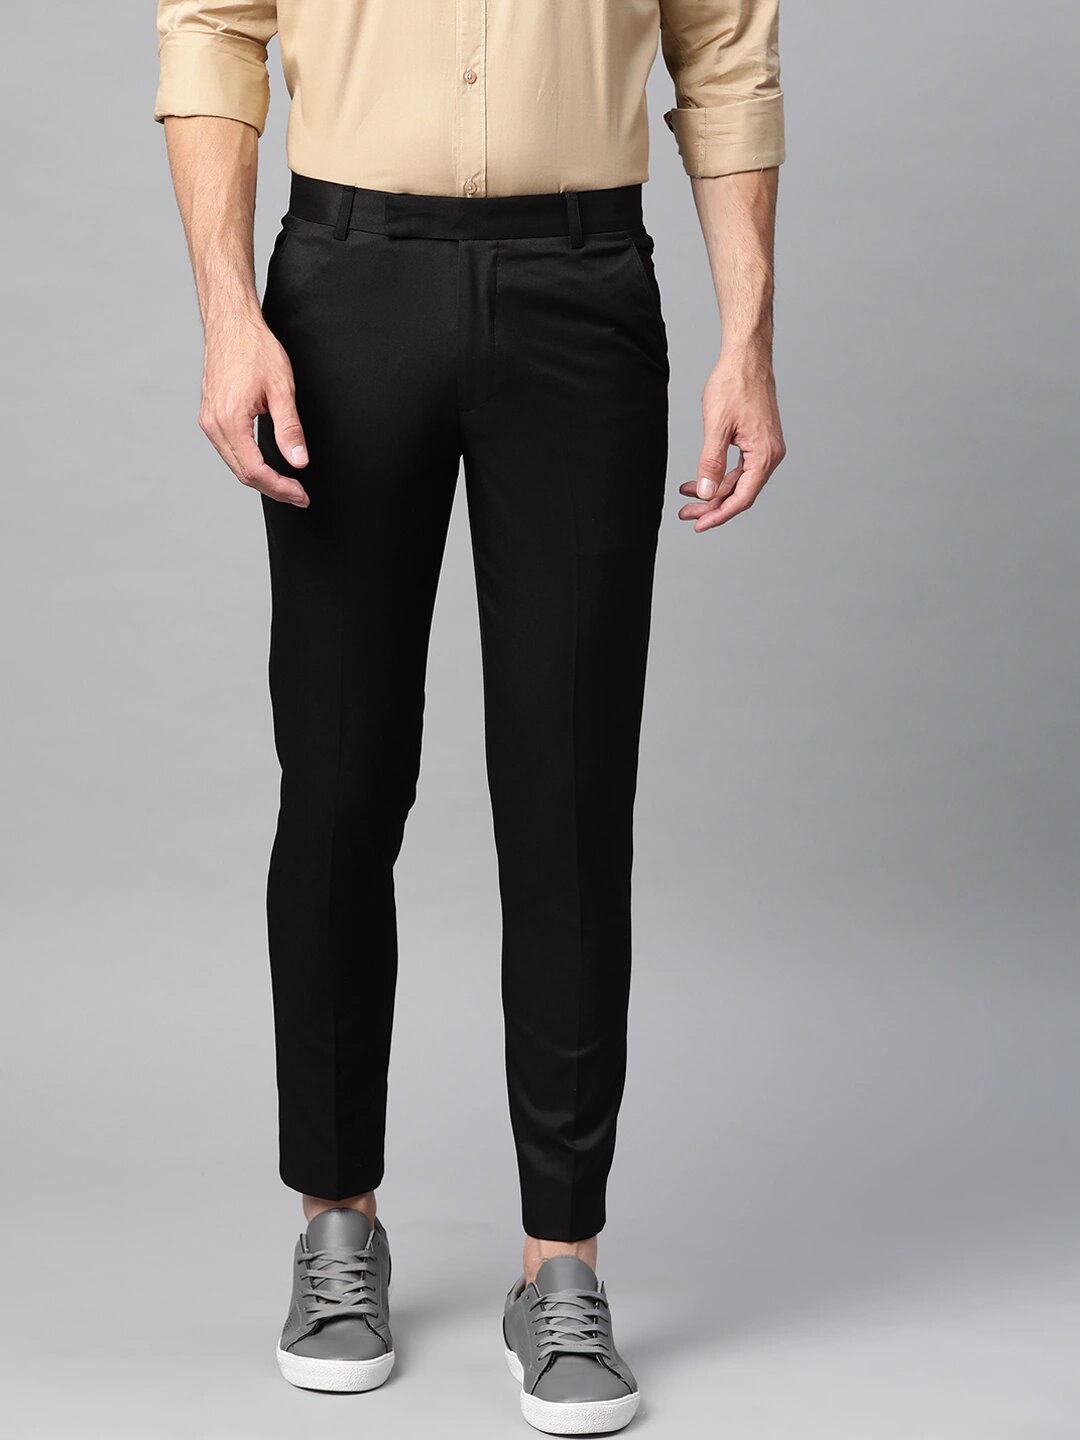 Abercrombie & Fitch Cropped Athletic Slim Chino Pants | Slim chino pants,  Chino pants men, Chinos pants